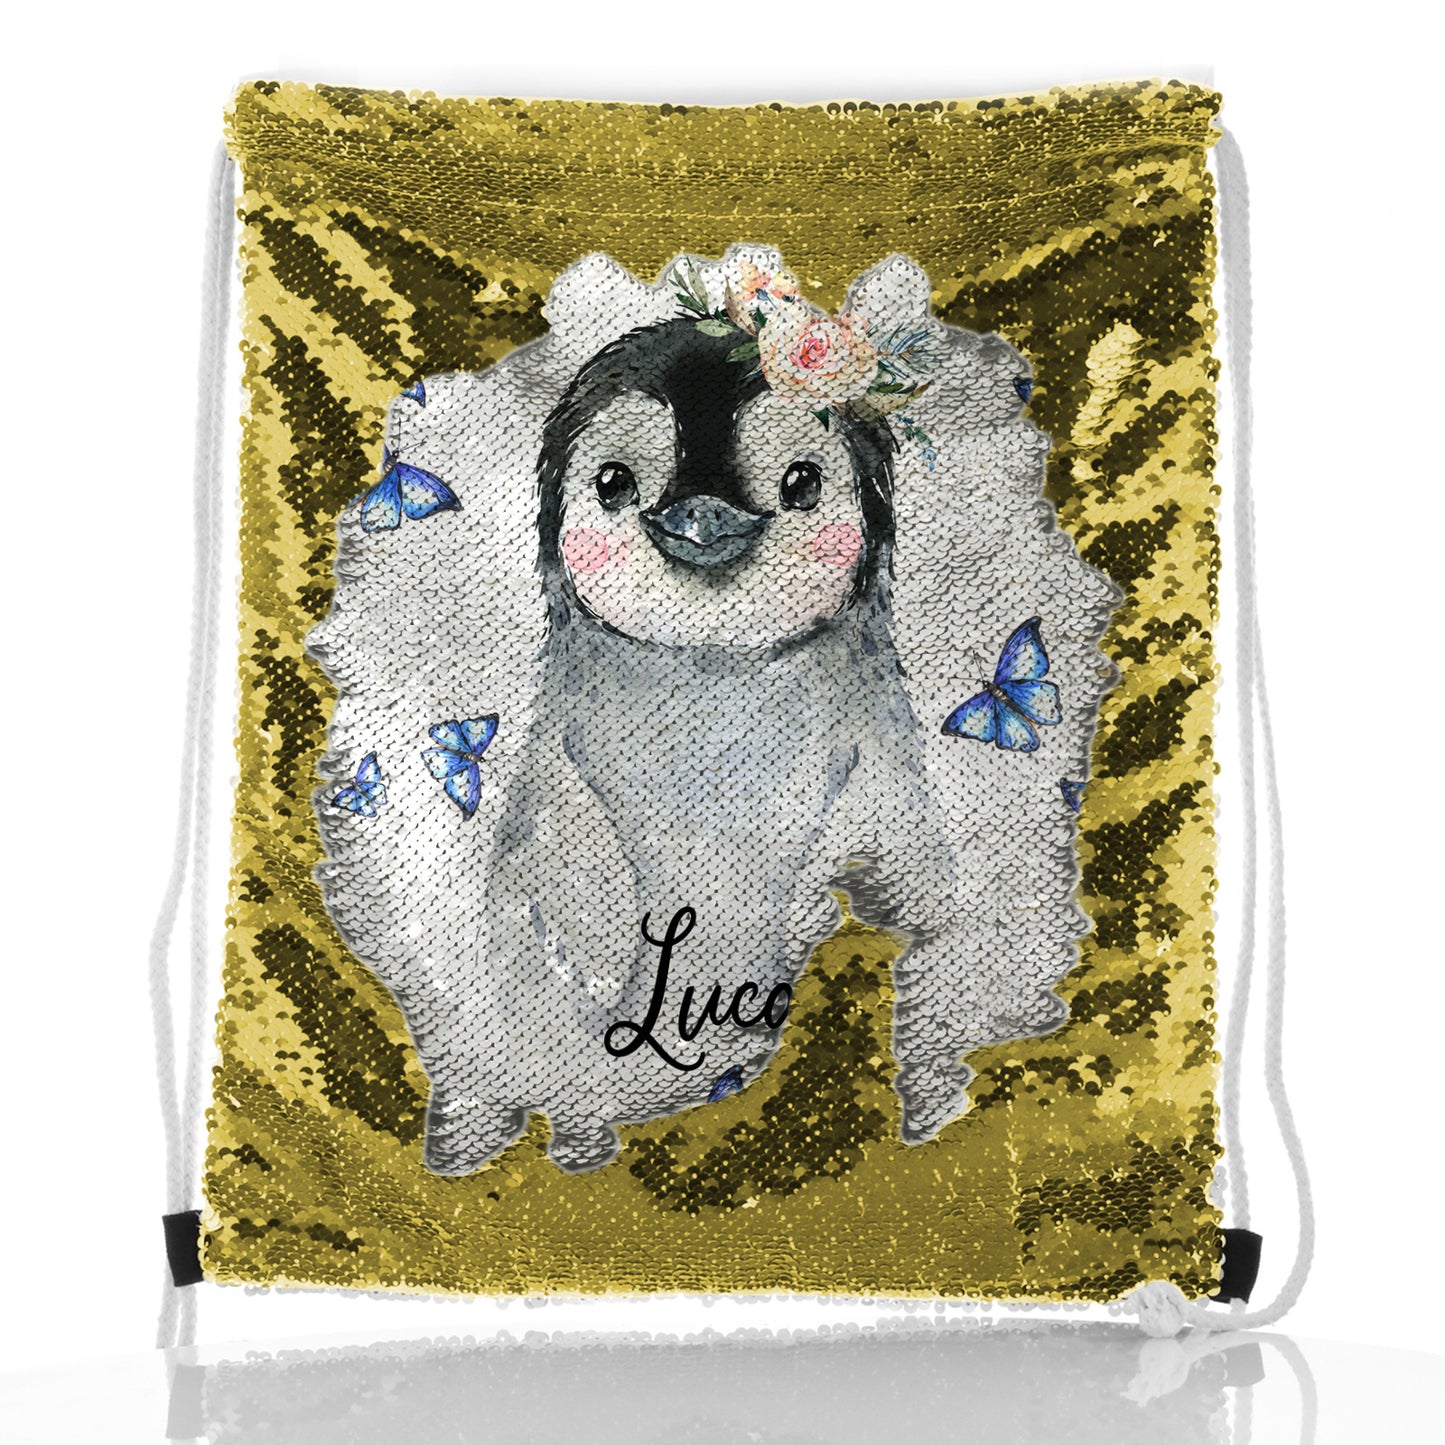 Personalised Sequin Drawstring Backpack with Grey Penguin Blue Butterflies and Cute Text